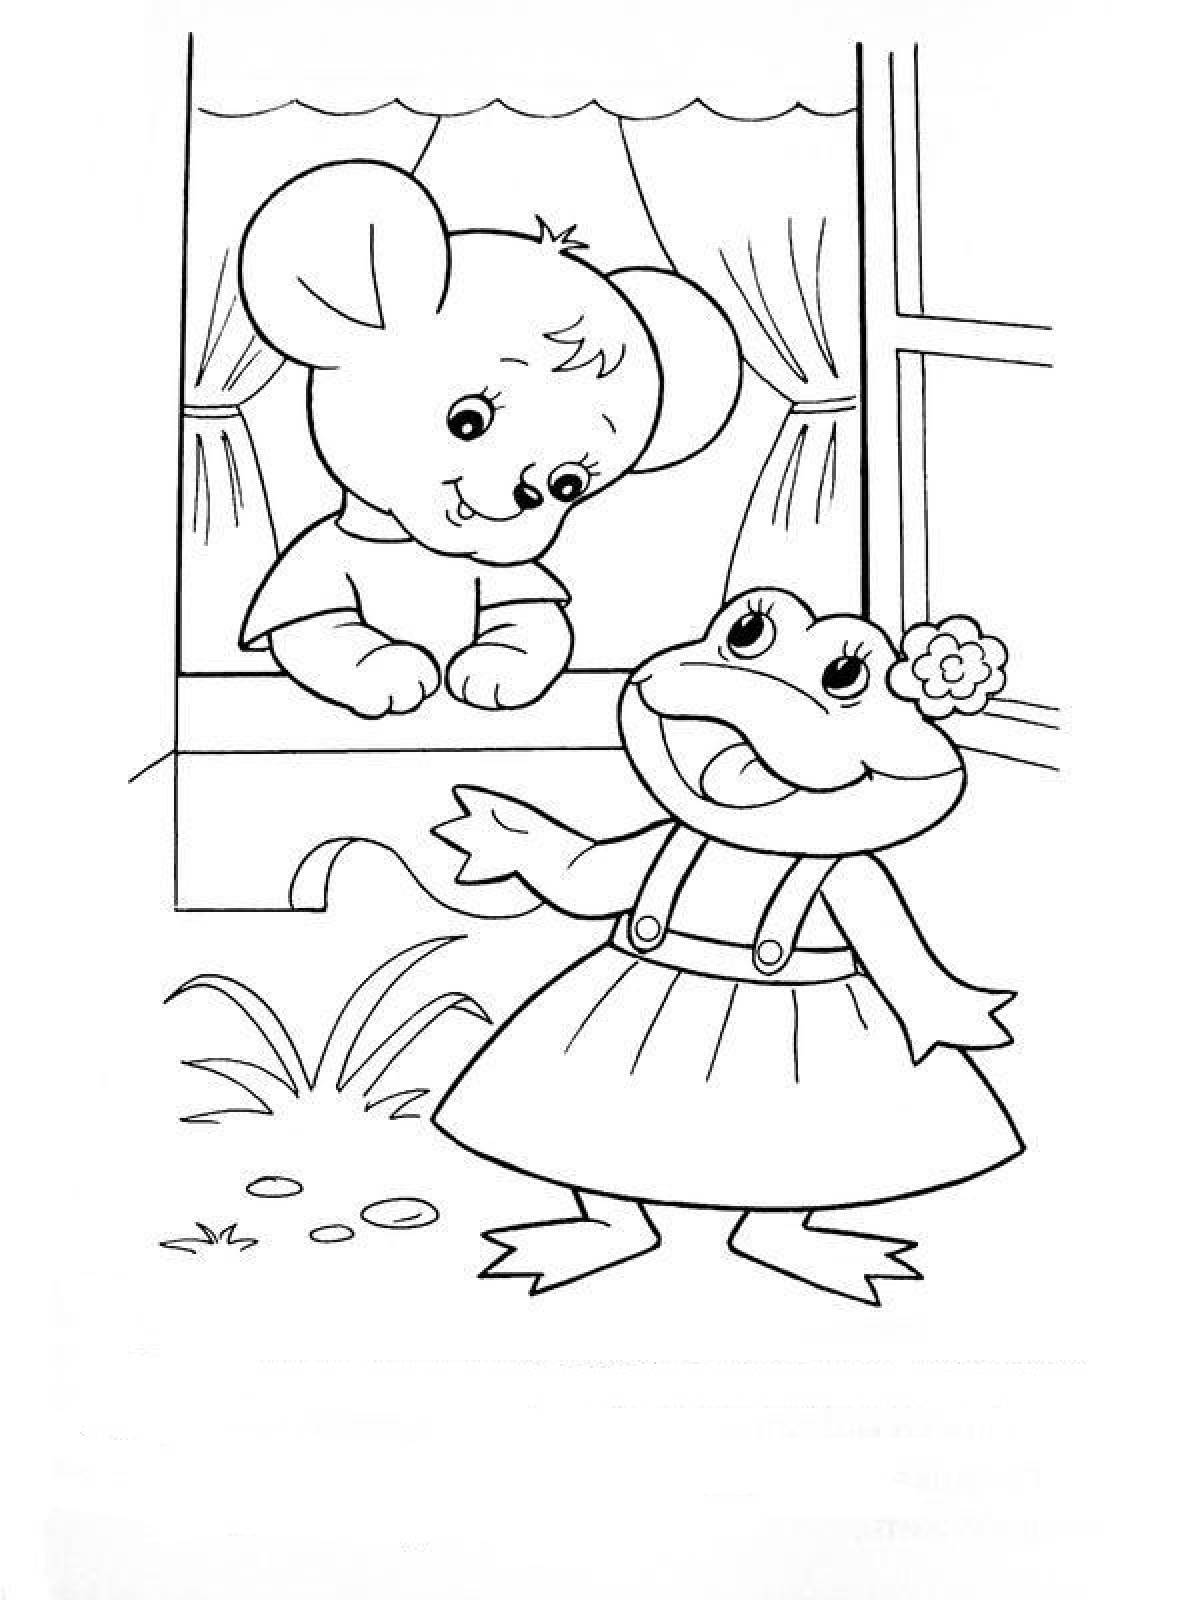 Frog and mouse